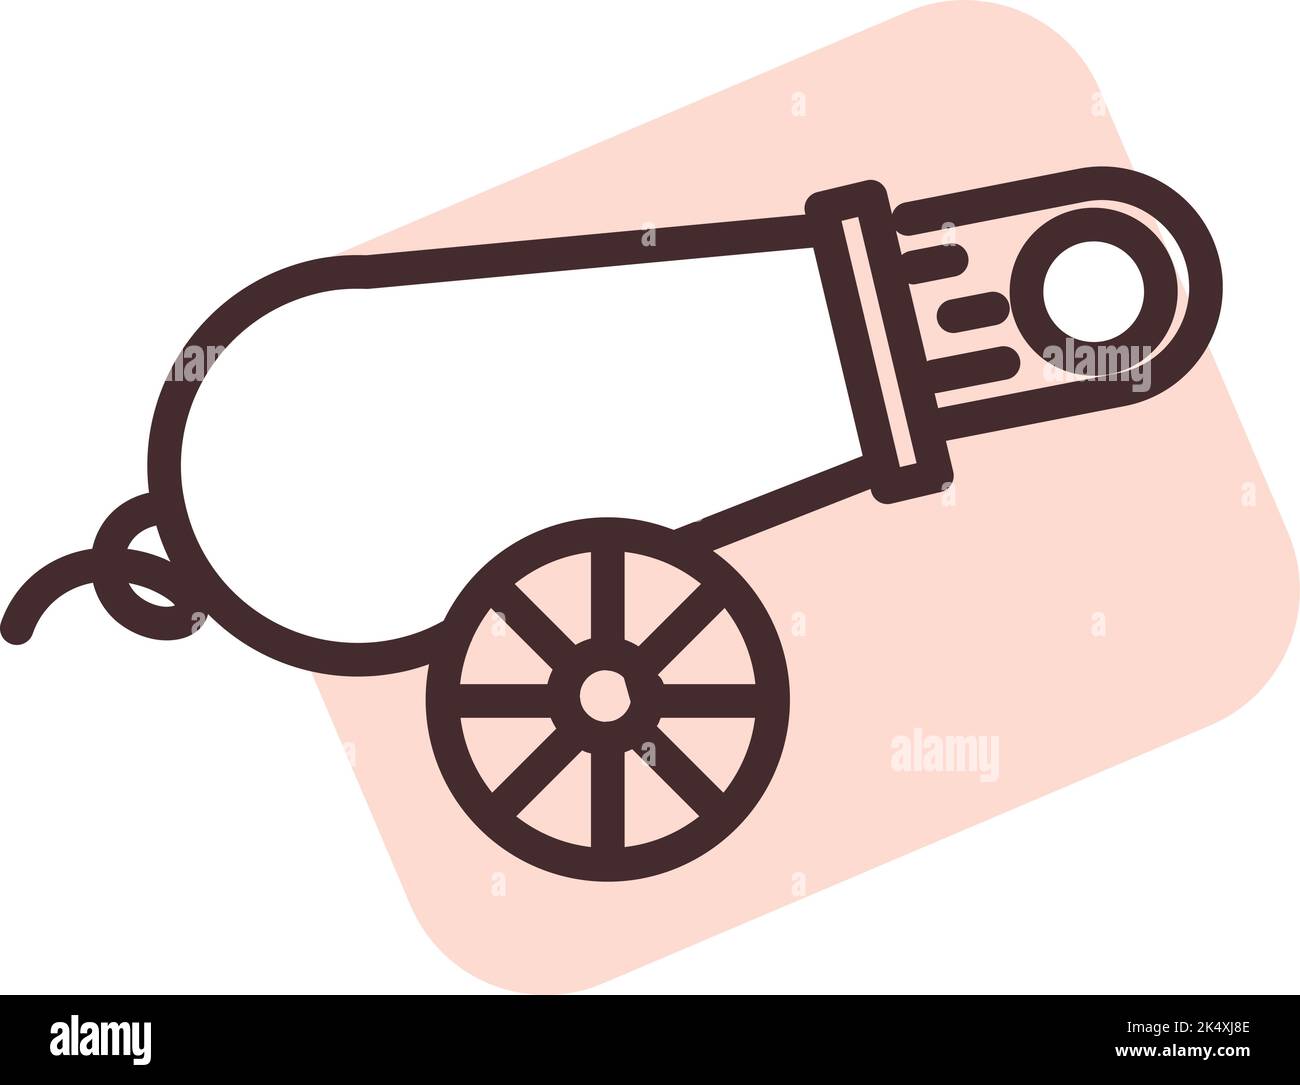 Circus cannon fire, illustration, vector on a white background. Stock Vector